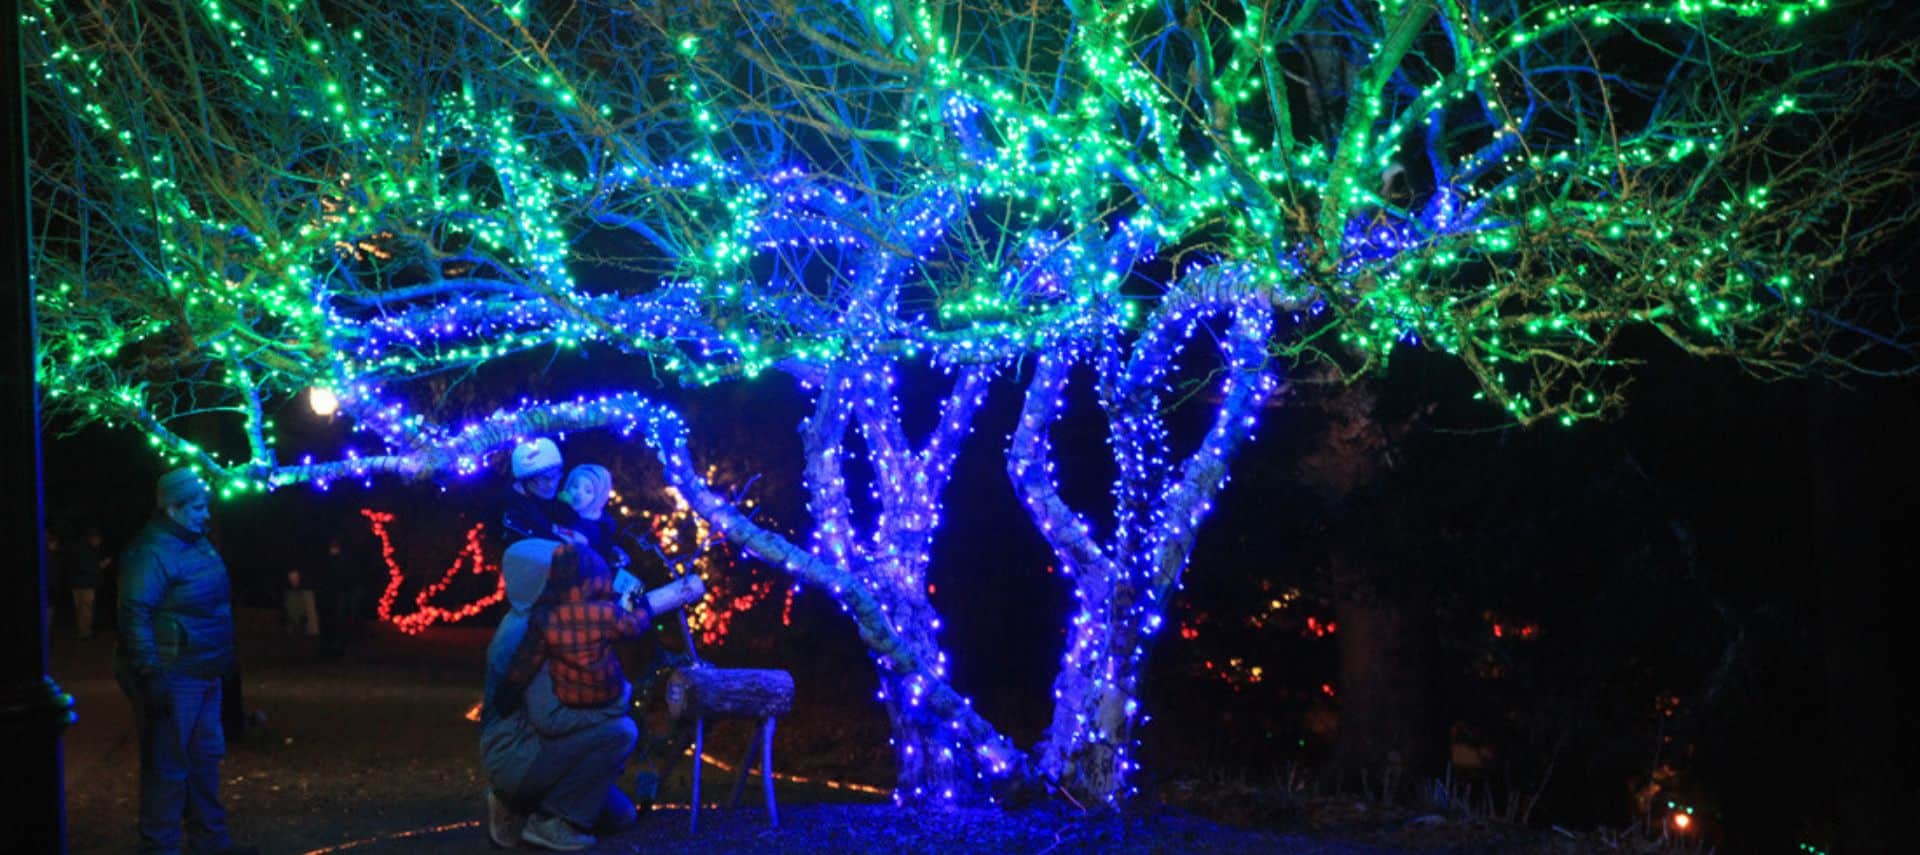 Blue and green twinkling lights wrapped around a tree all aglow on a wintery night